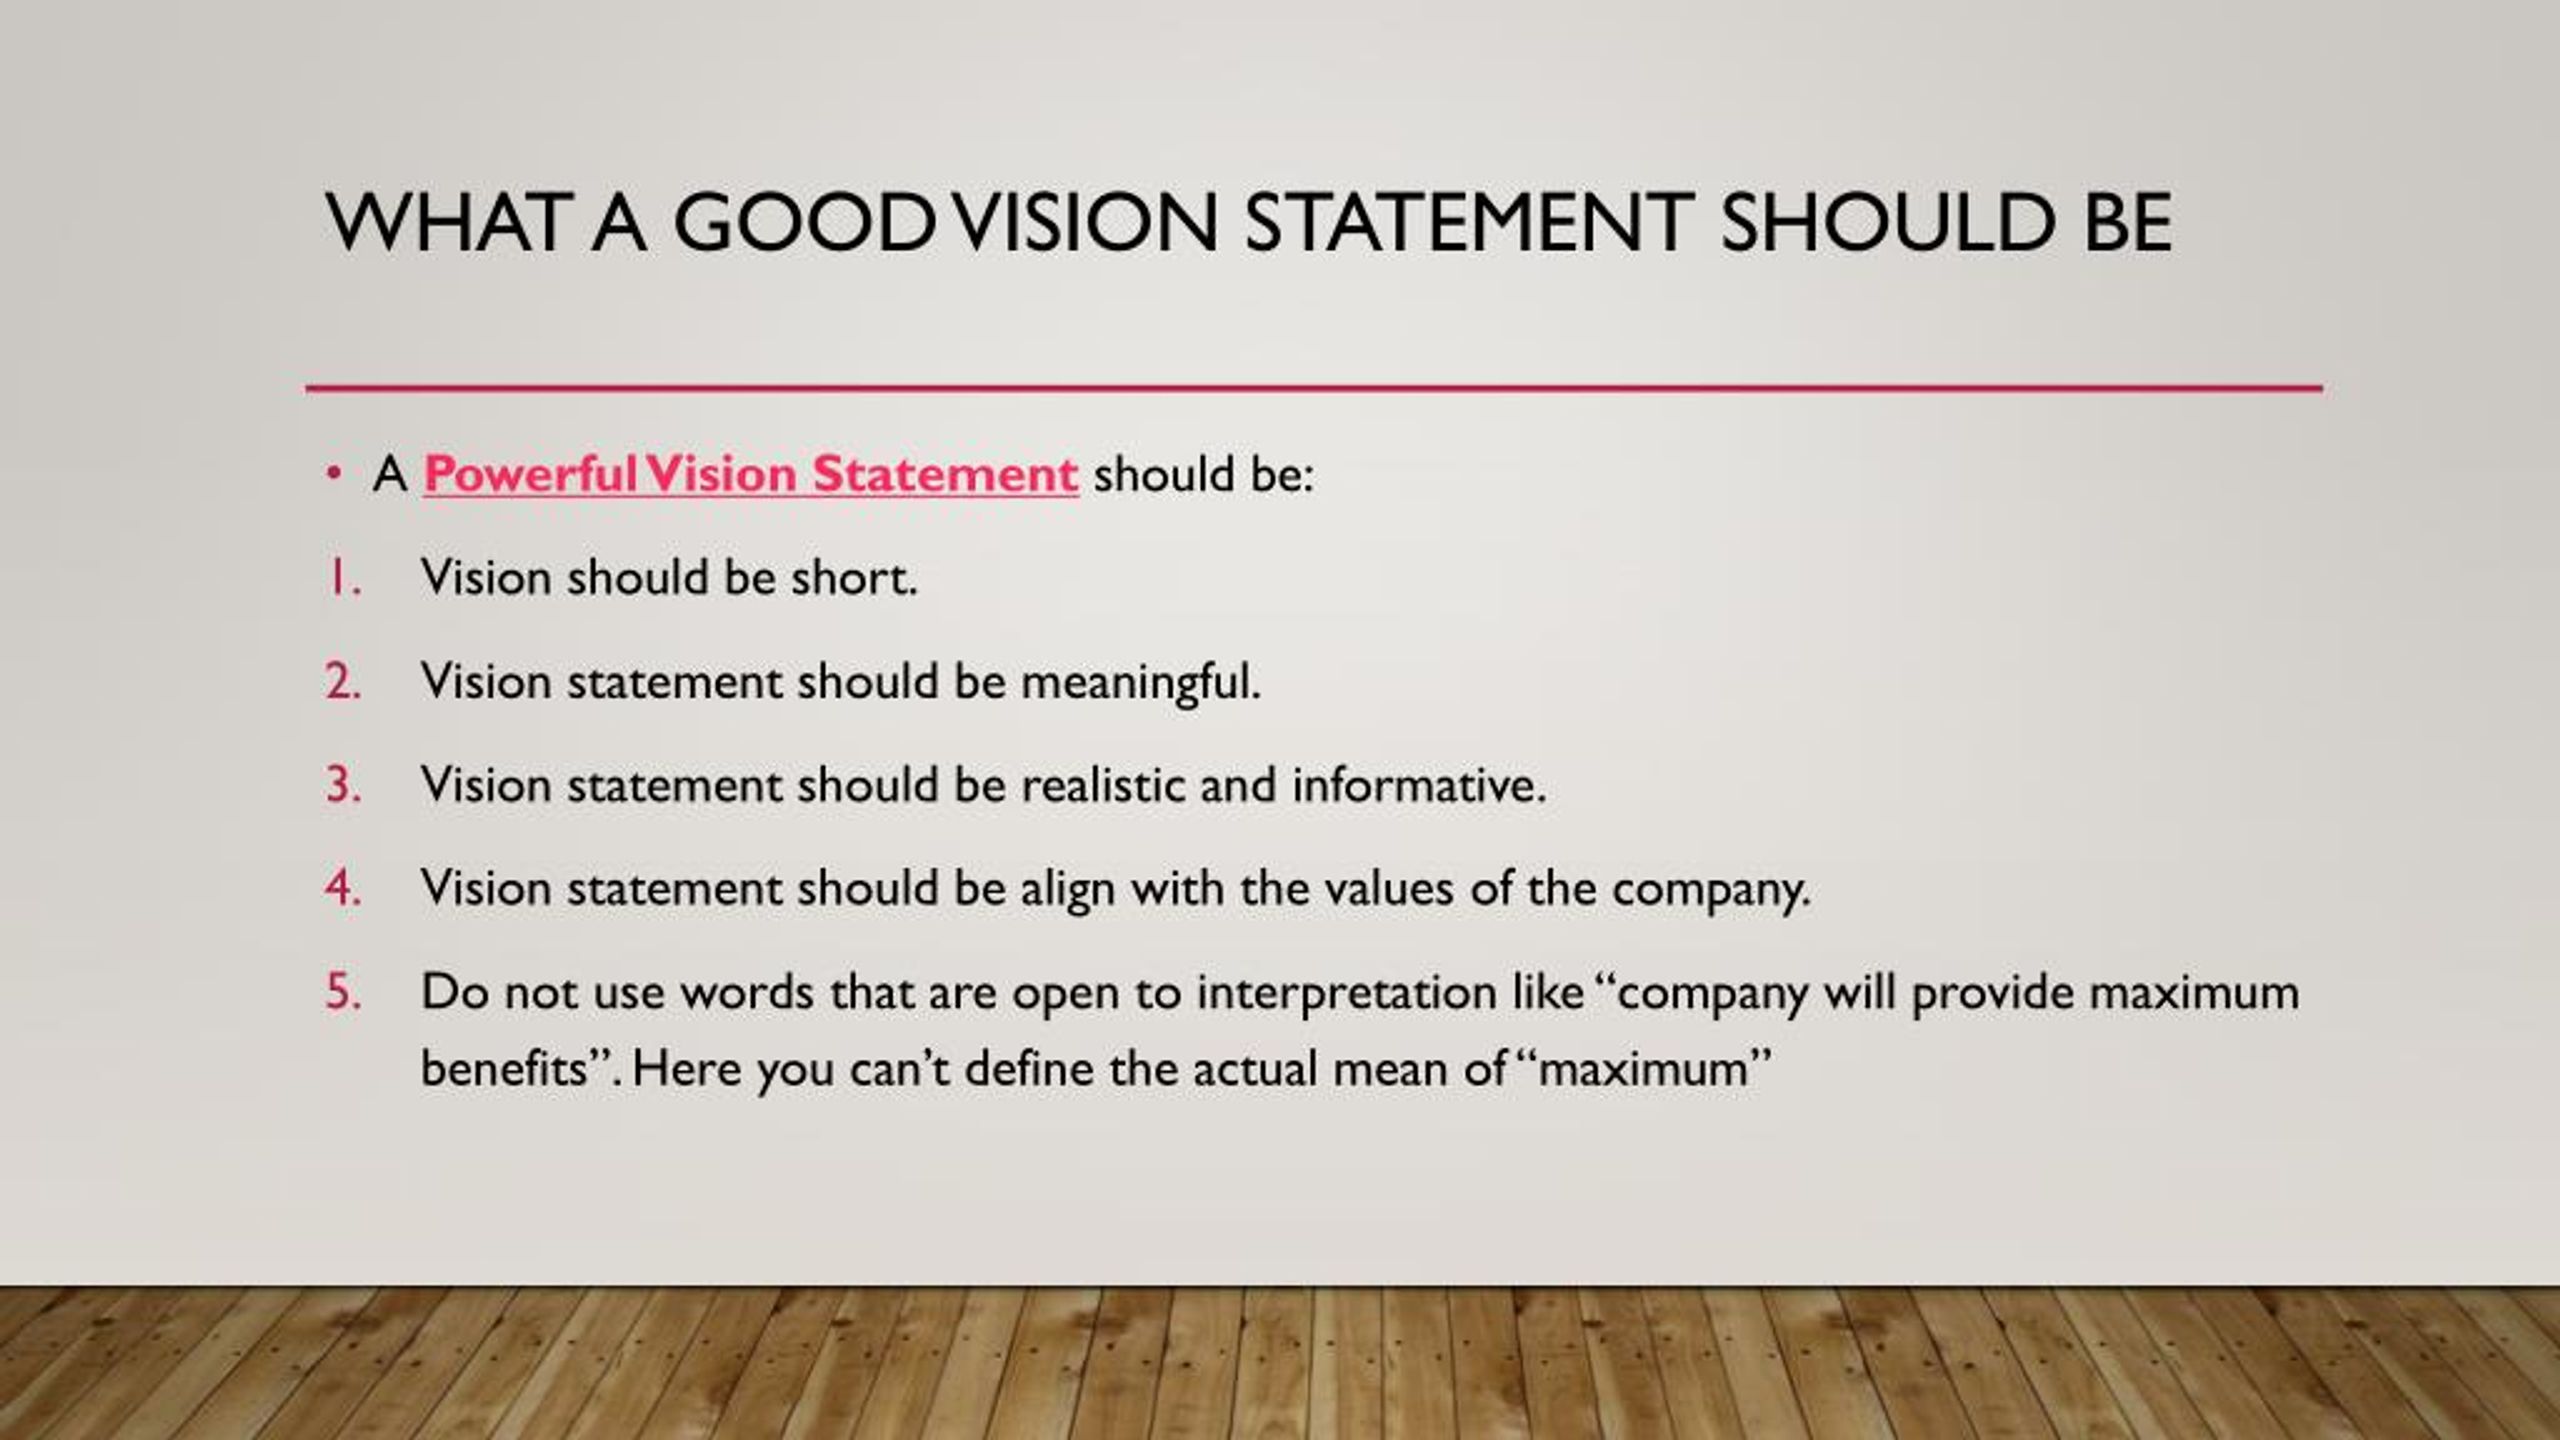 research vision statement